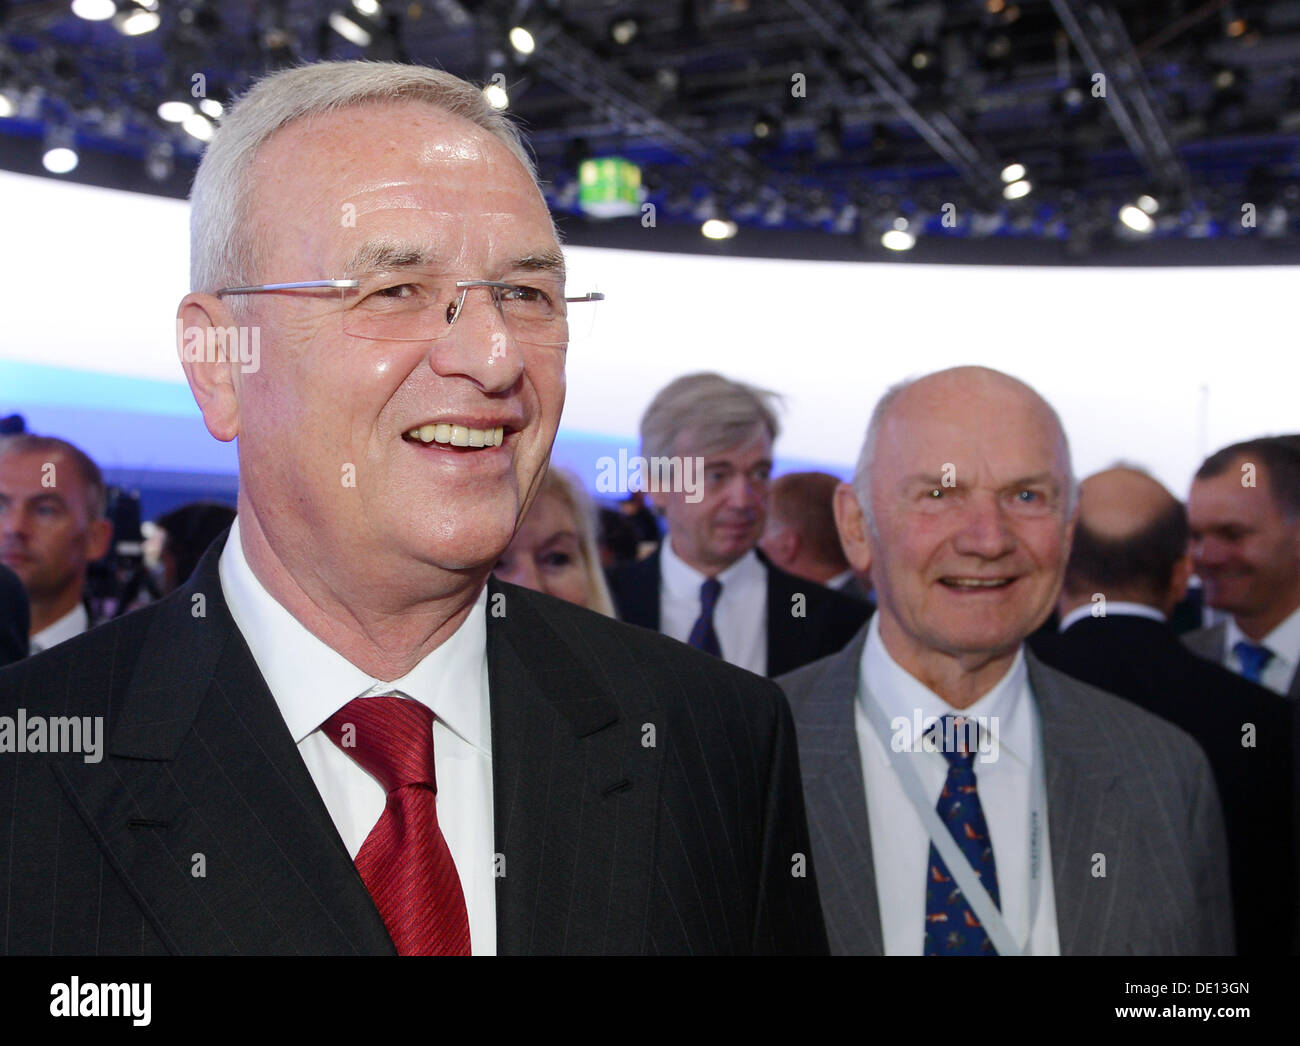 Frankfurt Main, Germany. 09th Sep, 2013. CEO of car manufacturer Volkswagen (VW), Martin Winterkorn (L) and chairman of the supervisory board of VW, Ferdinand Piech stand at the exhibition booth of Volkswagen AG at the press day of the Frankfurt Motor Show (IAA) in Frankfurt Main, Germany, 09 September 2013. Almost 1100 exhibitors will present their novelties at the automotive trade show from 12 till 22 September 2013. Photo: ULI DECK/dpa/Alamy Live News Stock Photo